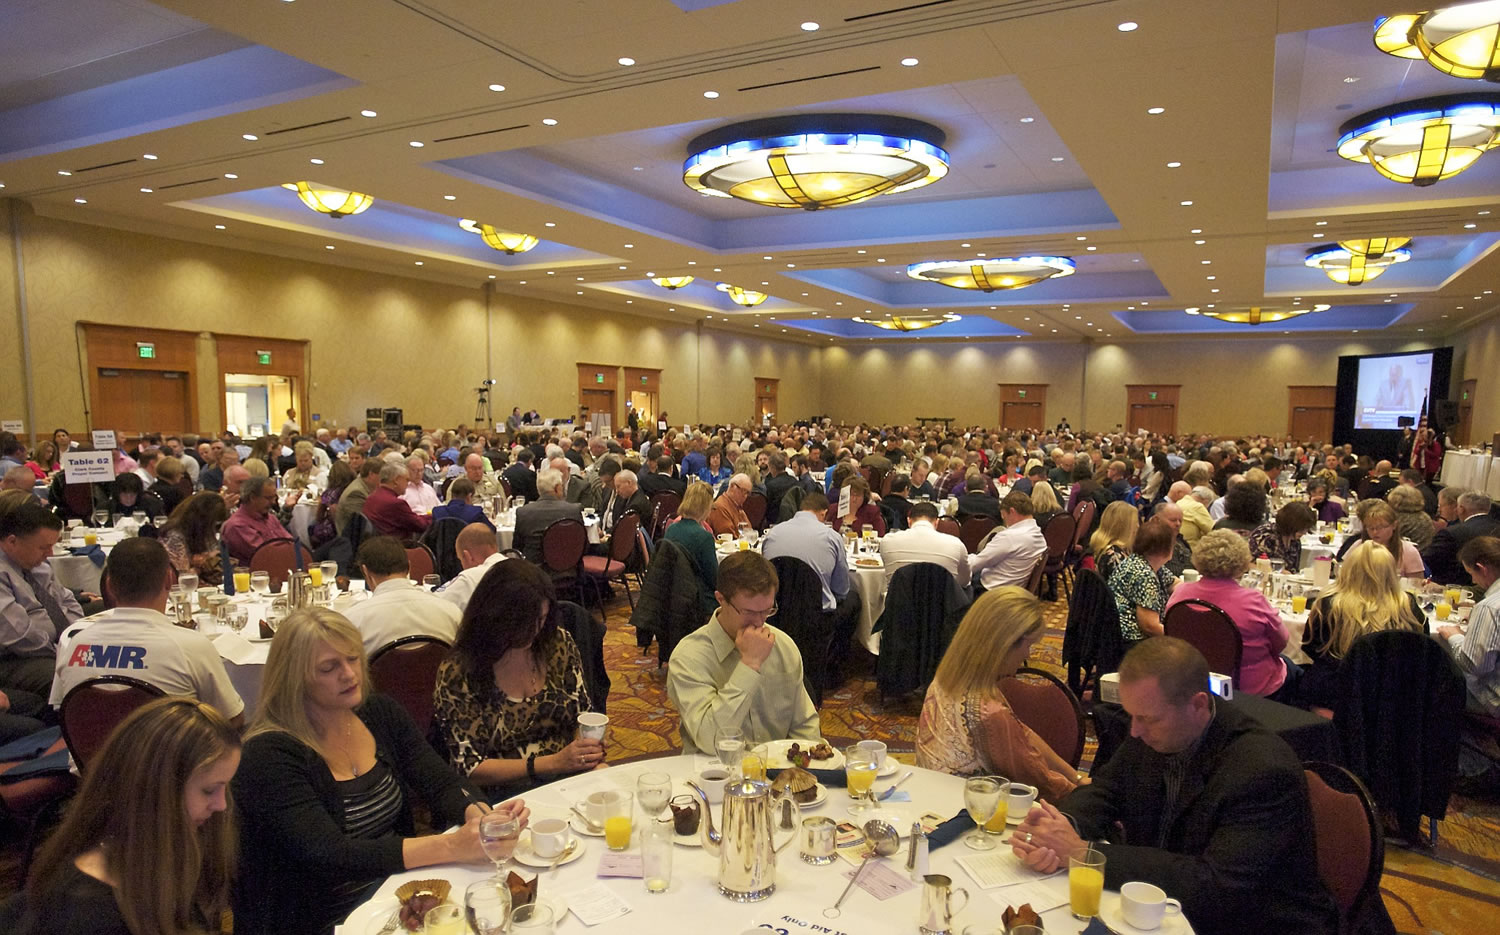 A crowd of more than 700 attends the Clark County's Mayor's and Civic Leaders 12th Annual Prayer Breakfast at the Hilton Vancouver Washington last year.